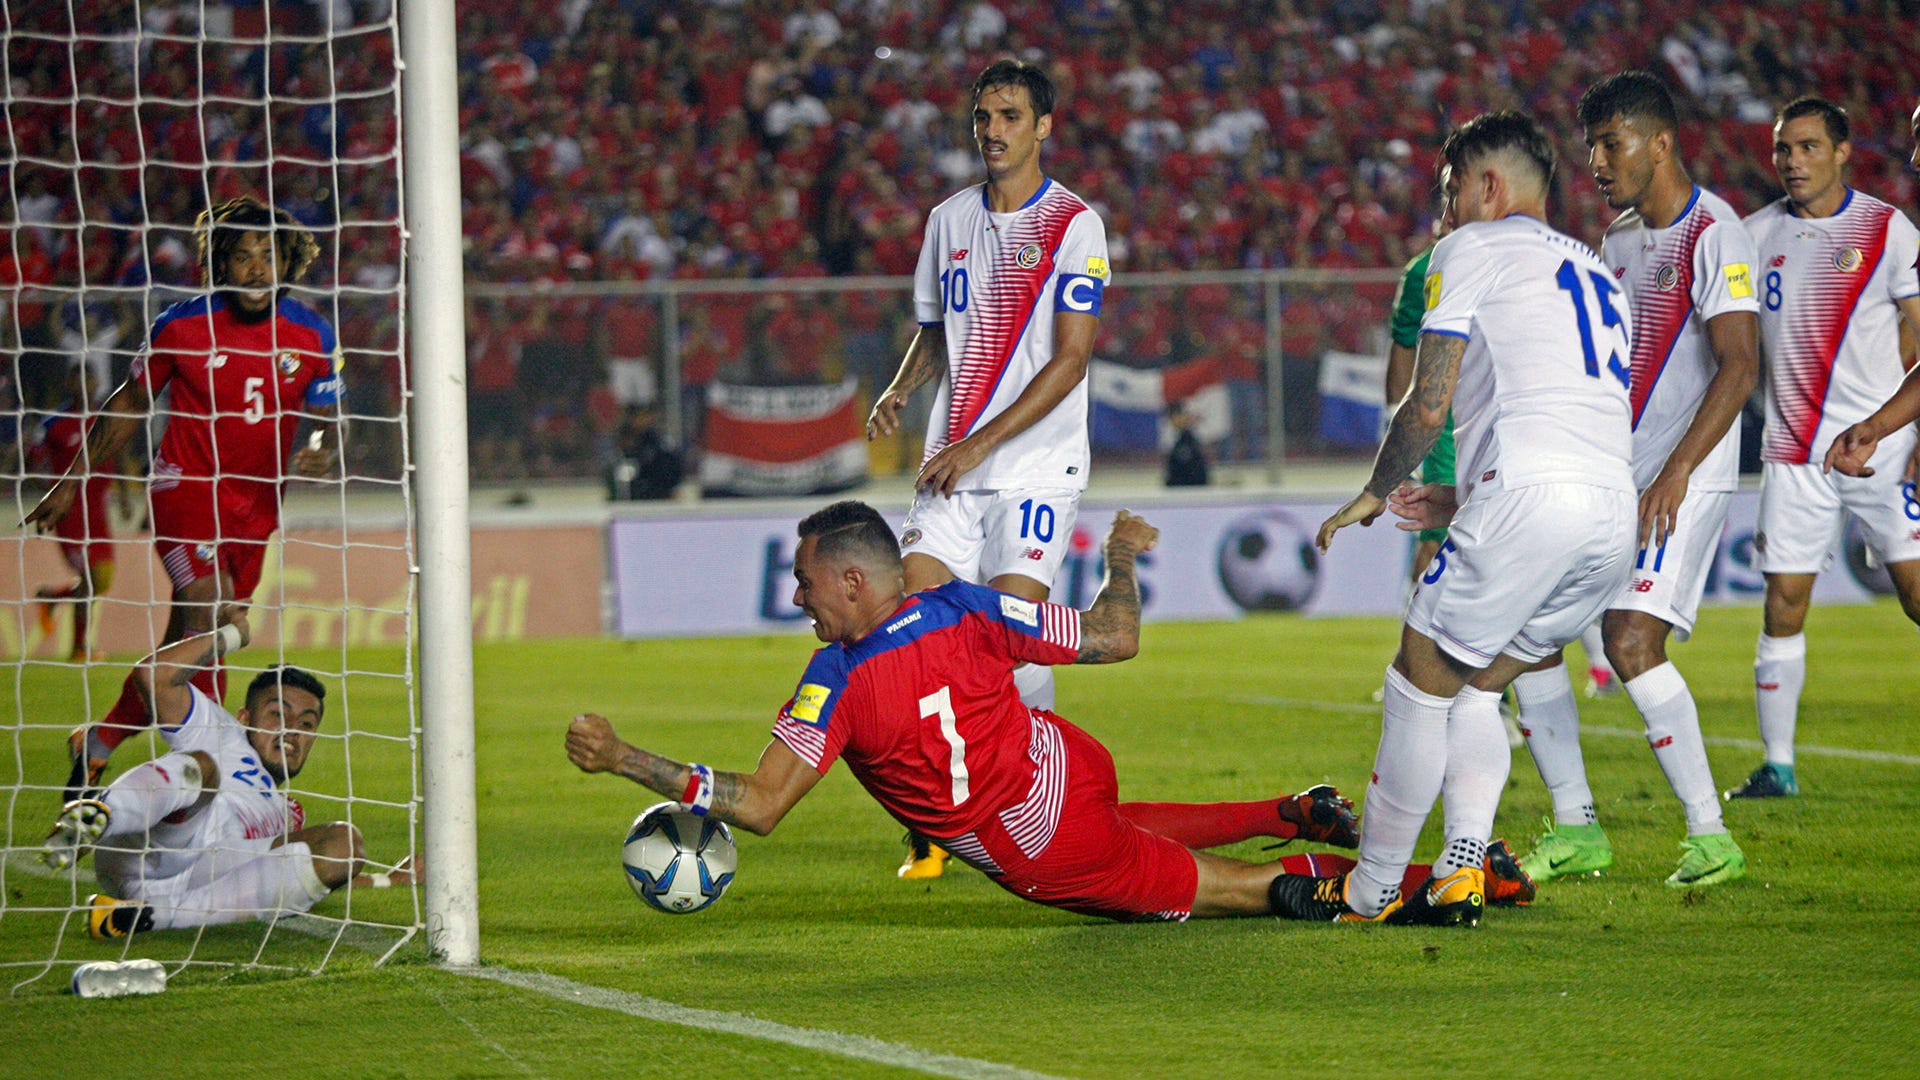 Usmnt Could Fifa Demand Panama Costa Rica Replay And Save U S World Cup 18 Hopes Goal Com Us